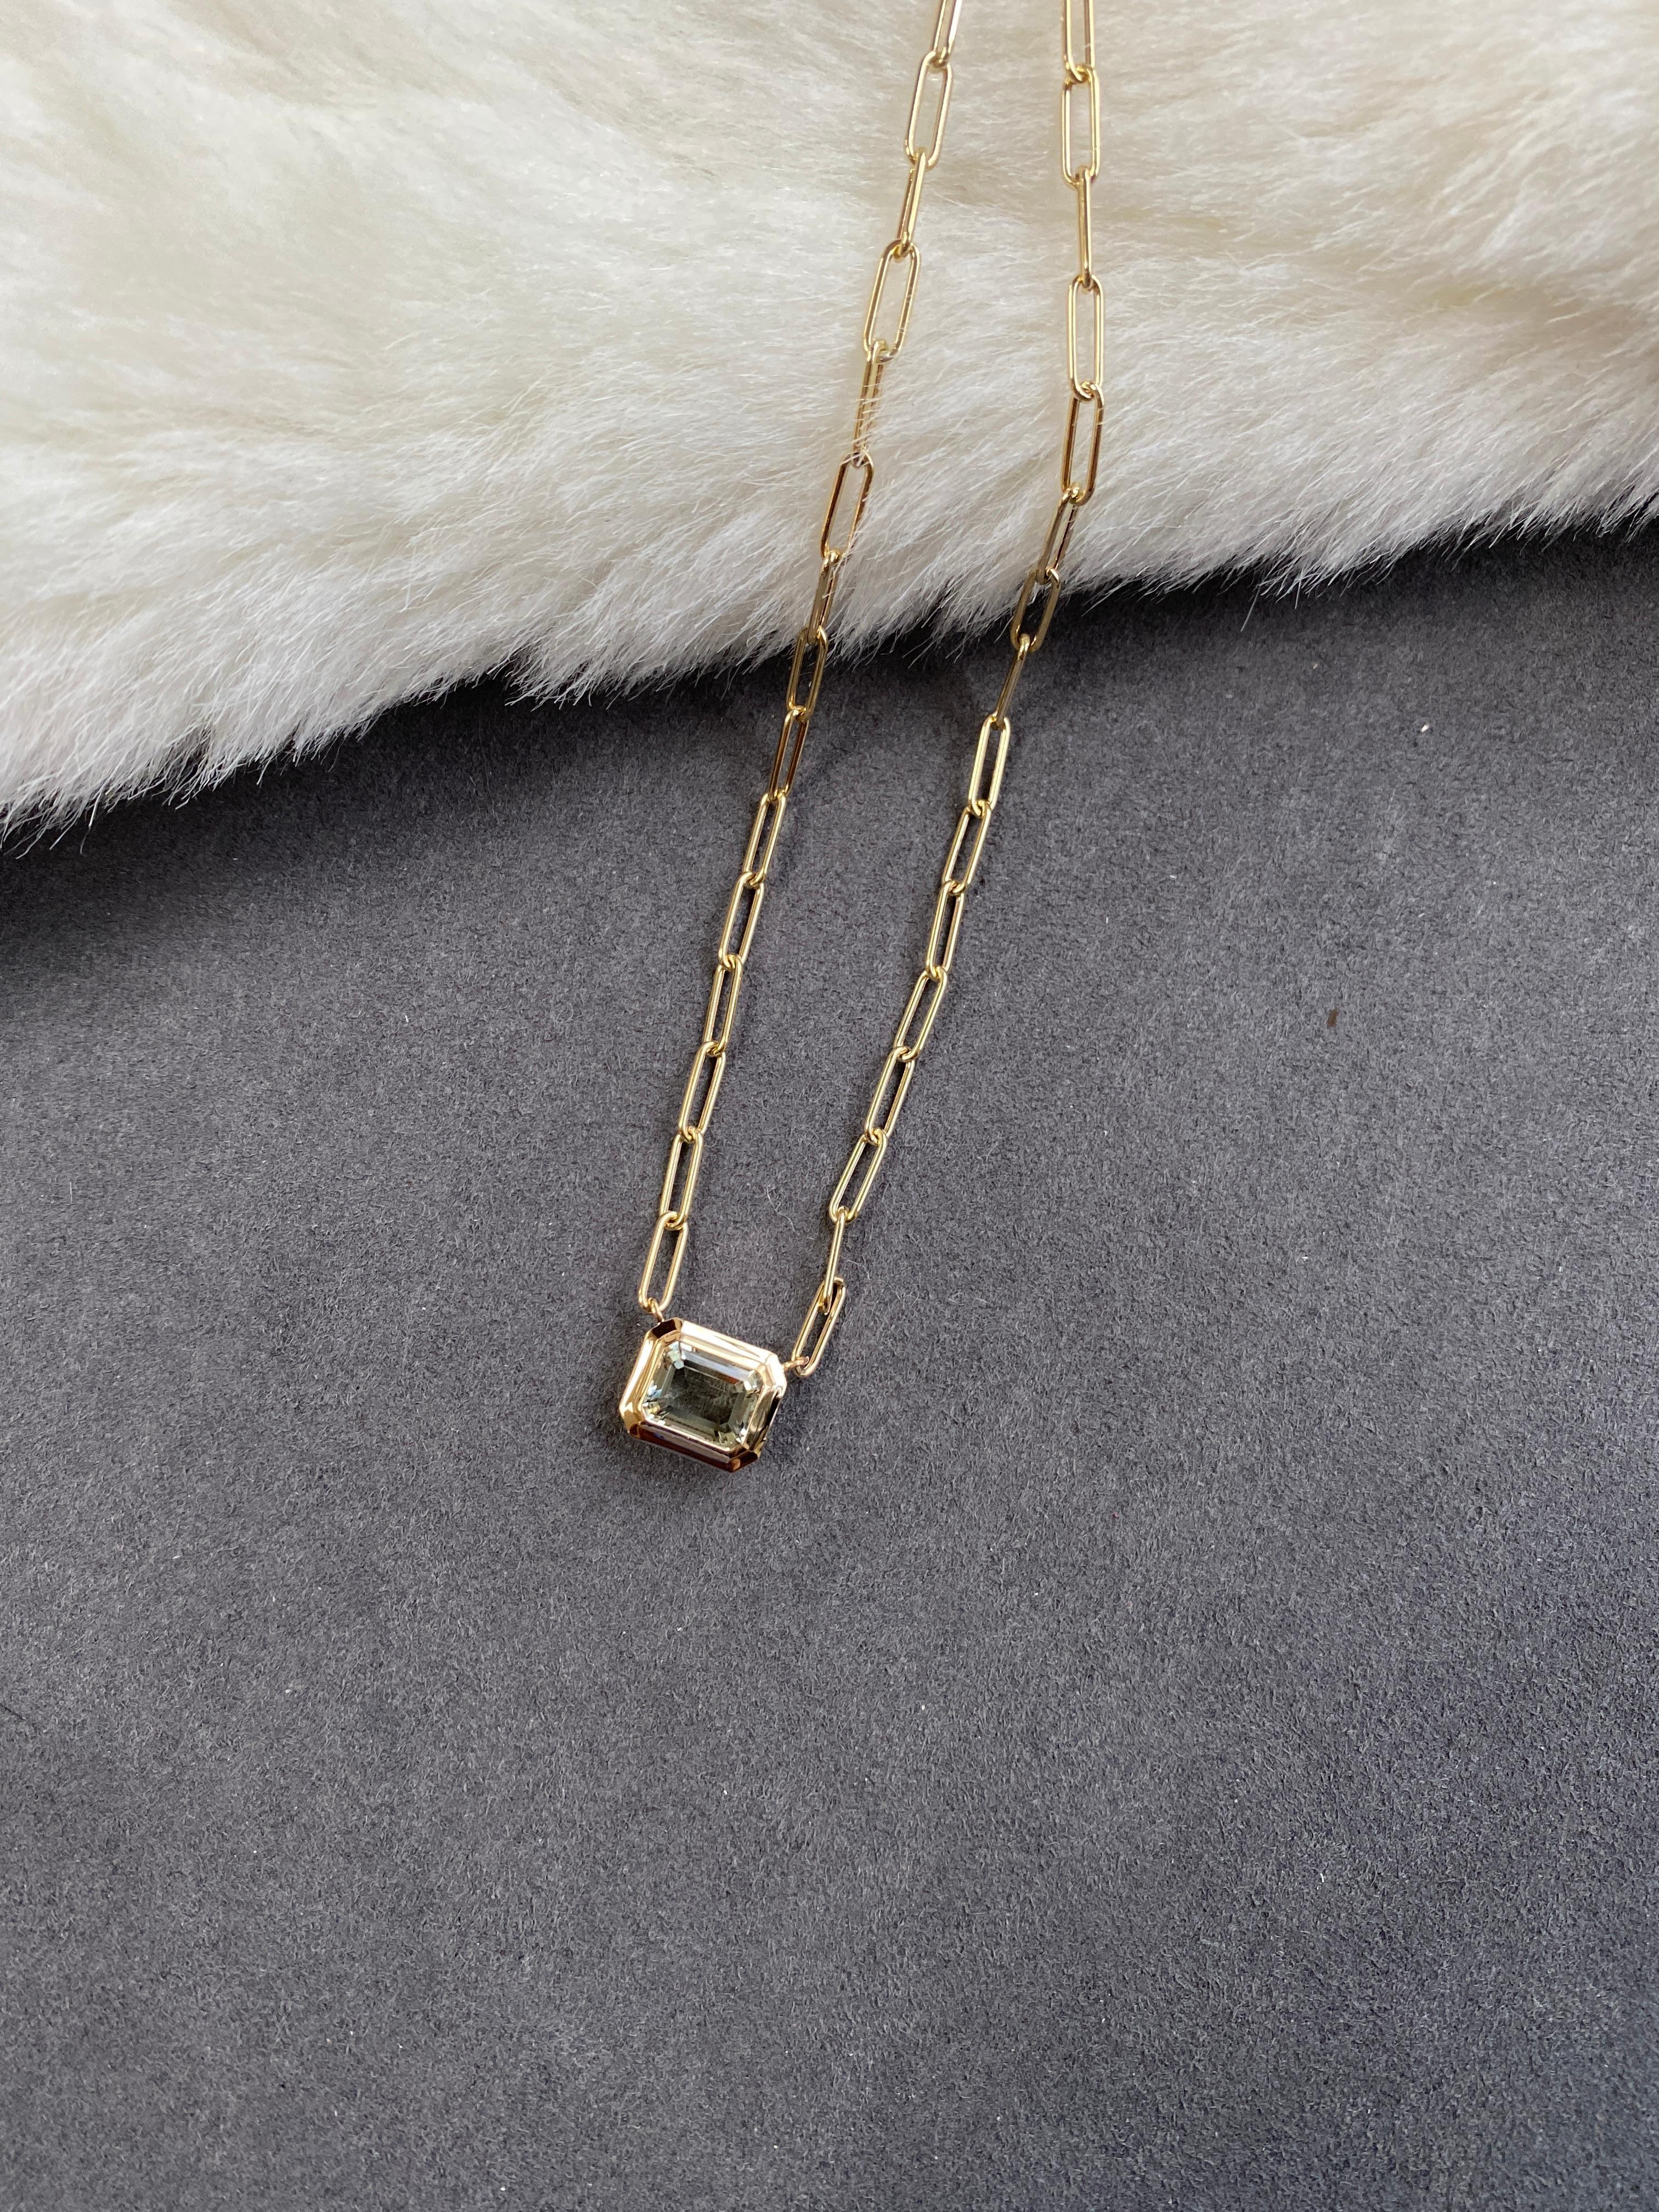 This beautiful East-West Prasiolite Emerald Cut Bezel Set Pendant in 18K Yellow Gold is from our ‘Manhattan’ Collection. Minimalist lines yet bold structures are what our Manhattan Collection is all about. Our pieces represent the famous skyline and